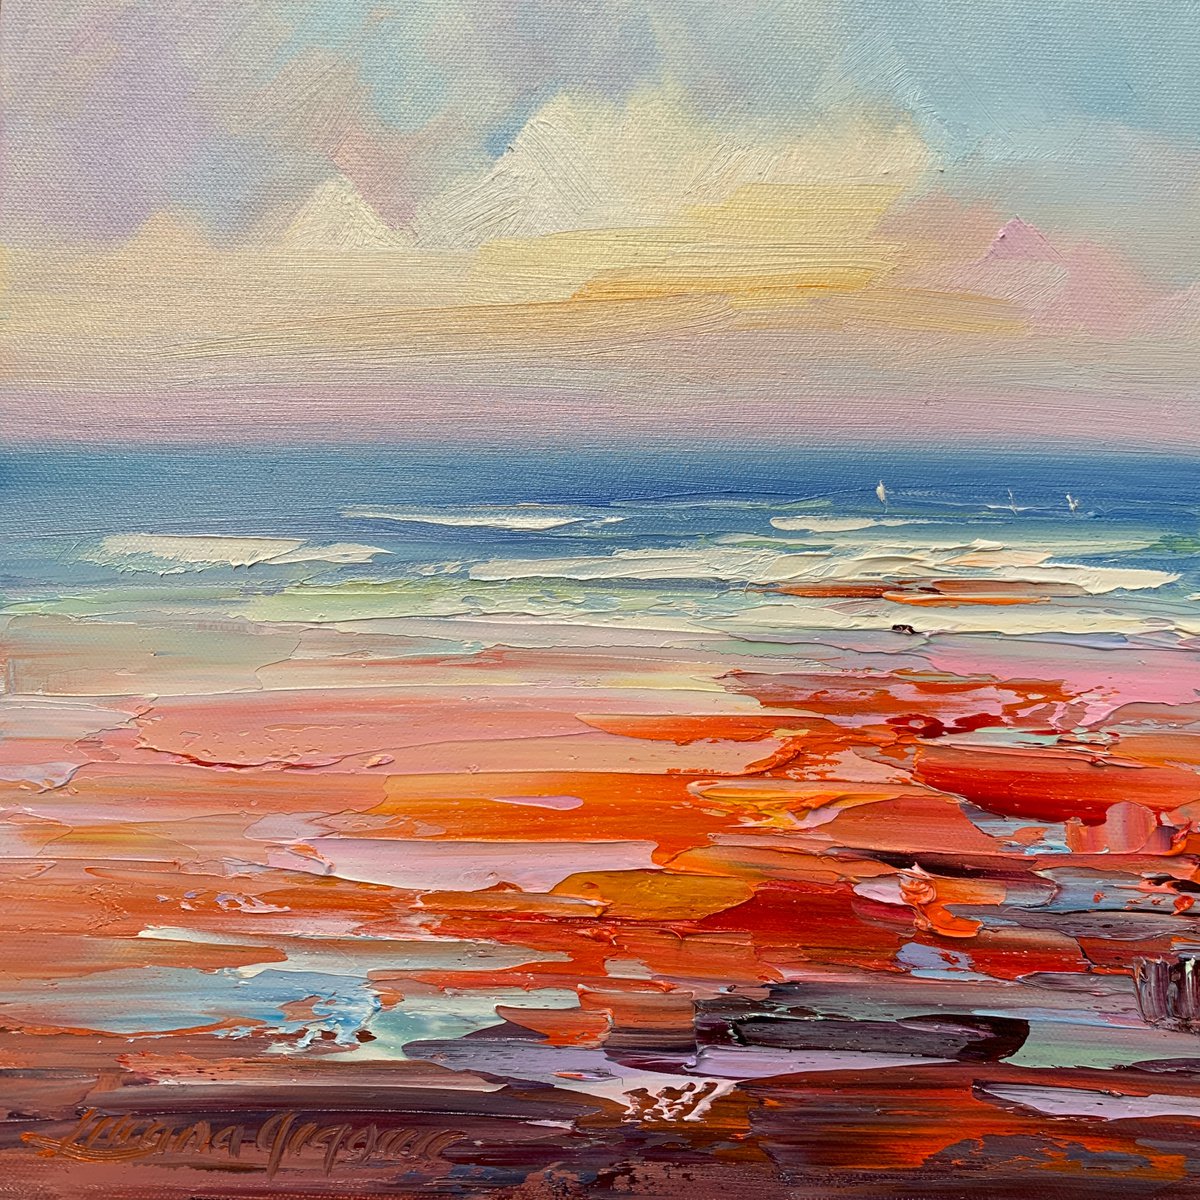 Colours of the ocean No 22 by Liliana Gigovic